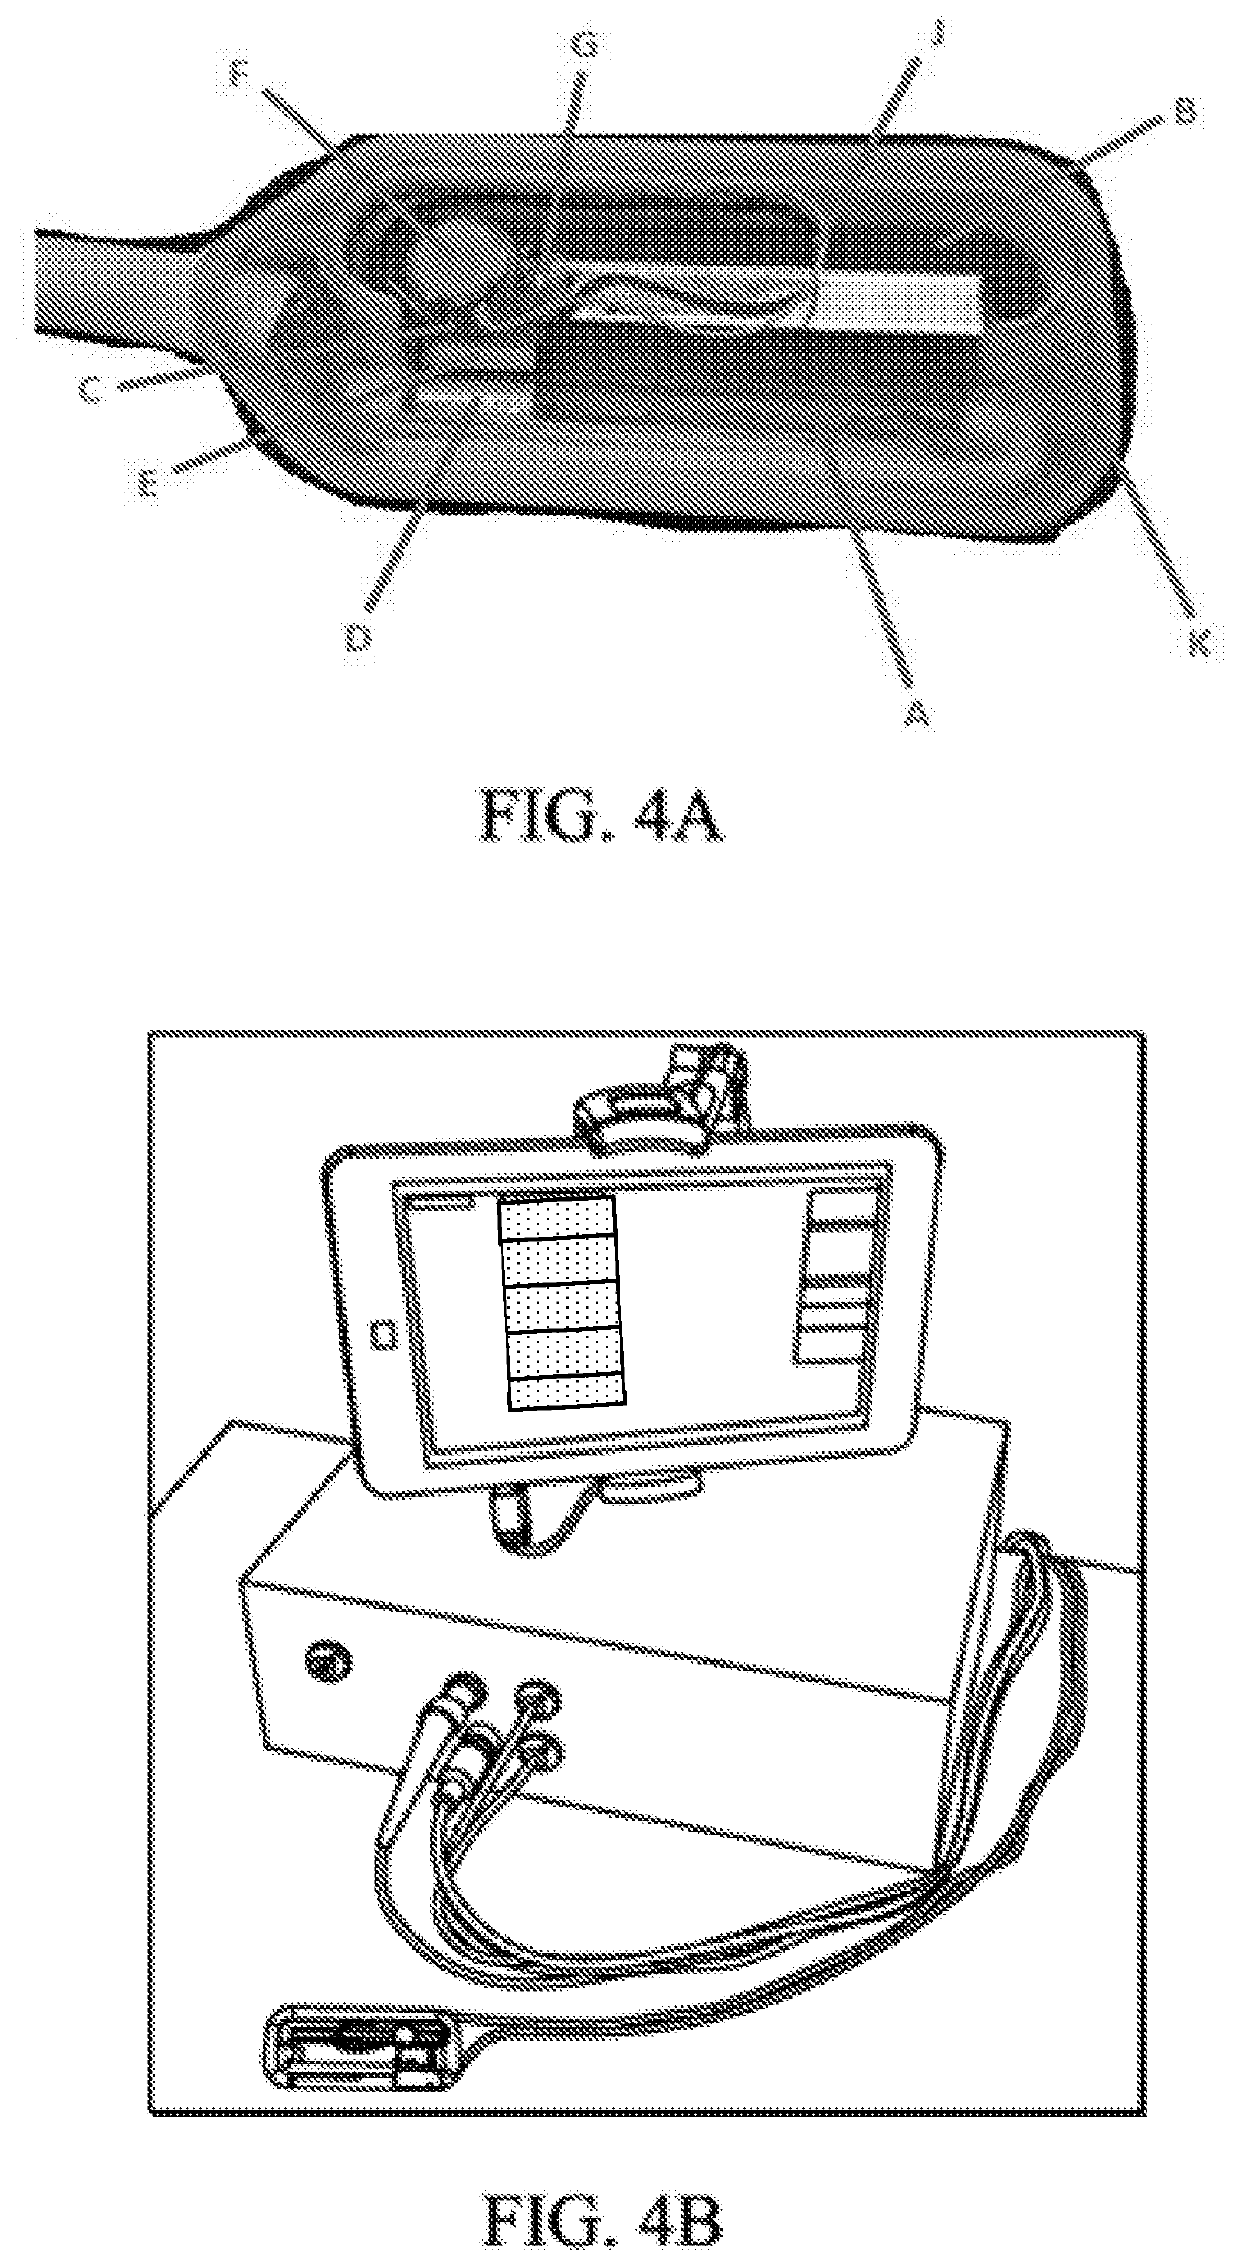 Automated ultrasound apparatus and methods to non-invasively monitor fluid responsiveness